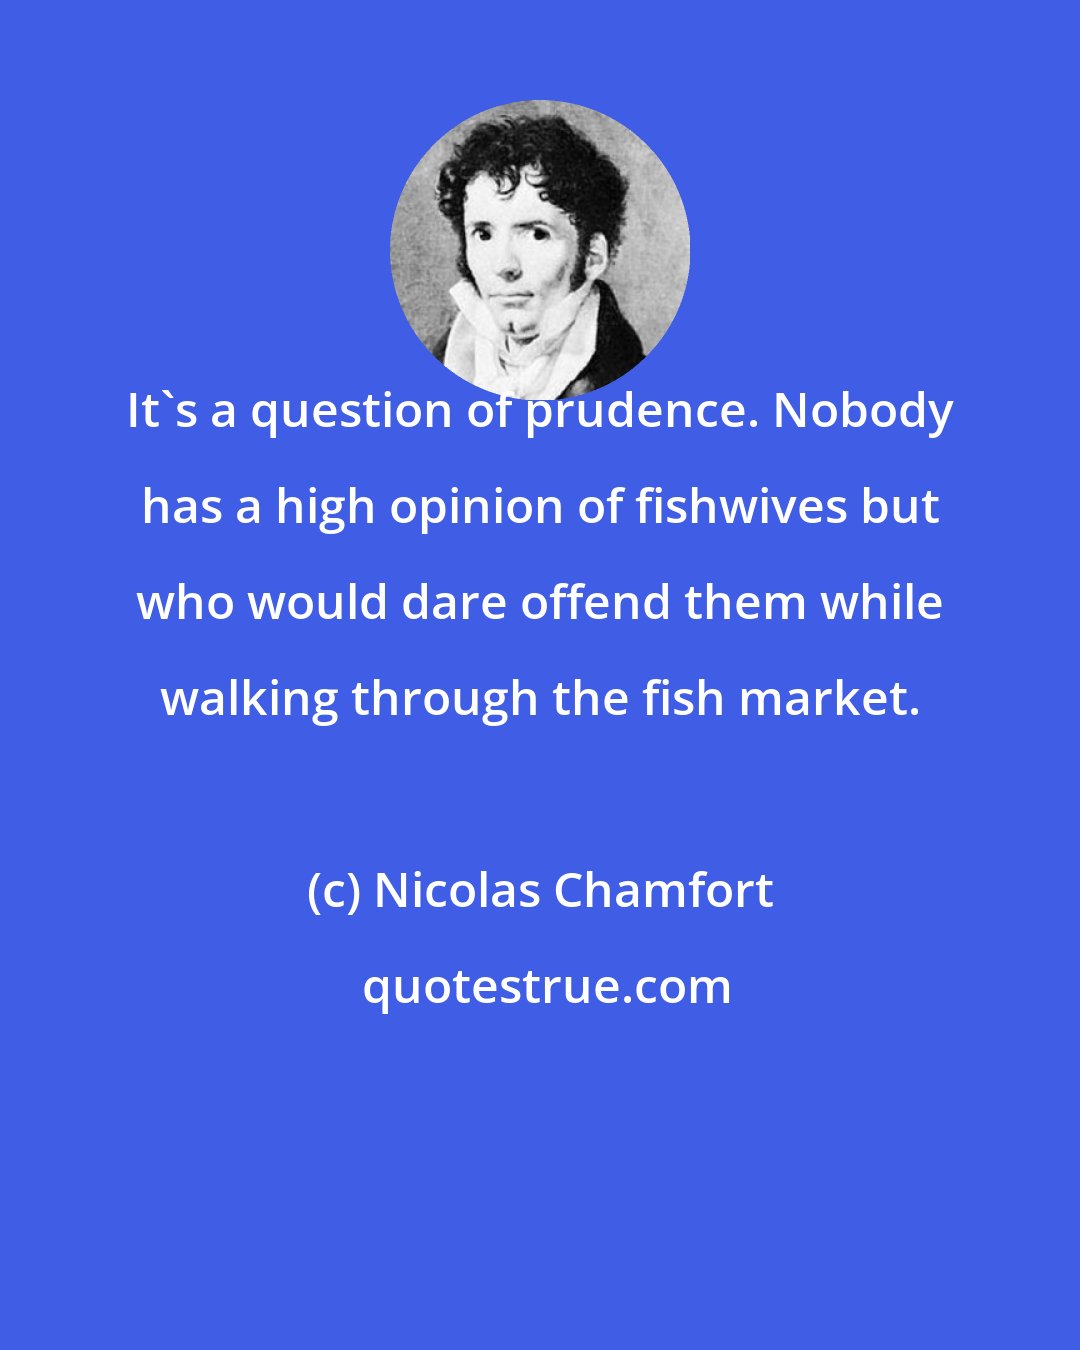 Nicolas Chamfort: It's a question of prudence. Nobody has a high opinion of fishwives but who would dare offend them while walking through the fish market.